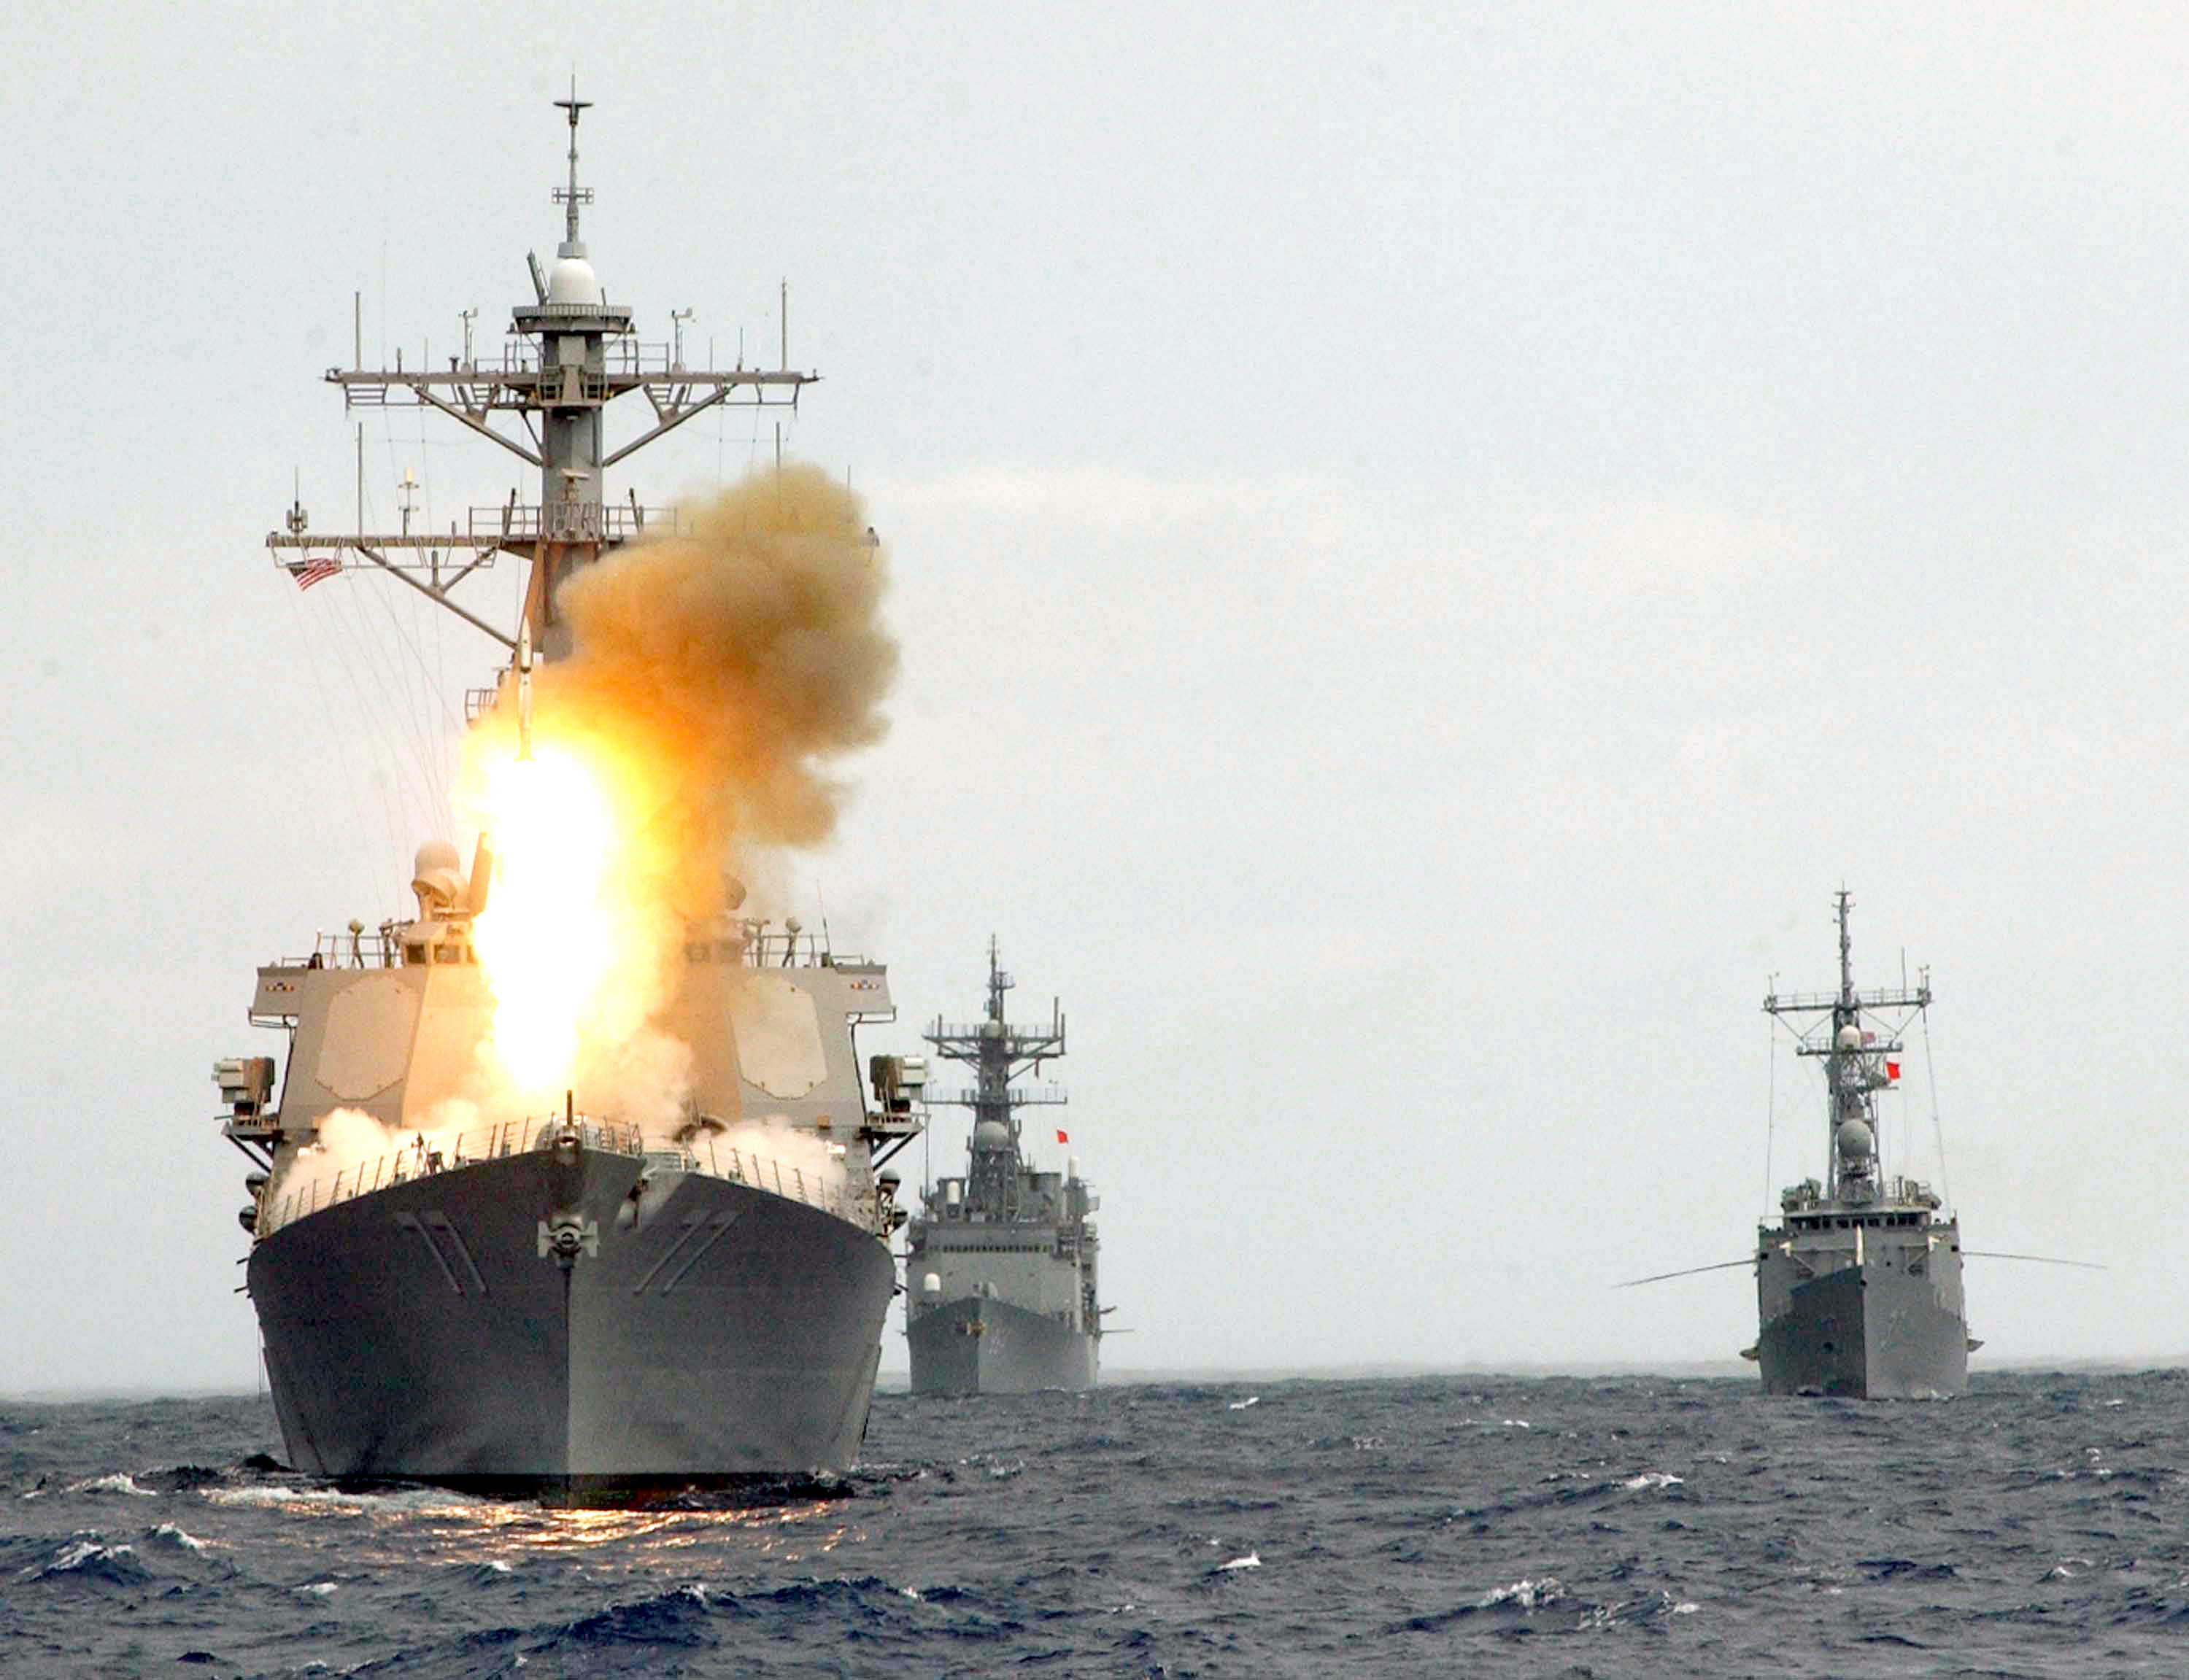 Vertical Launch System (VLS) - Photo Courtesy of the U.S. Navy